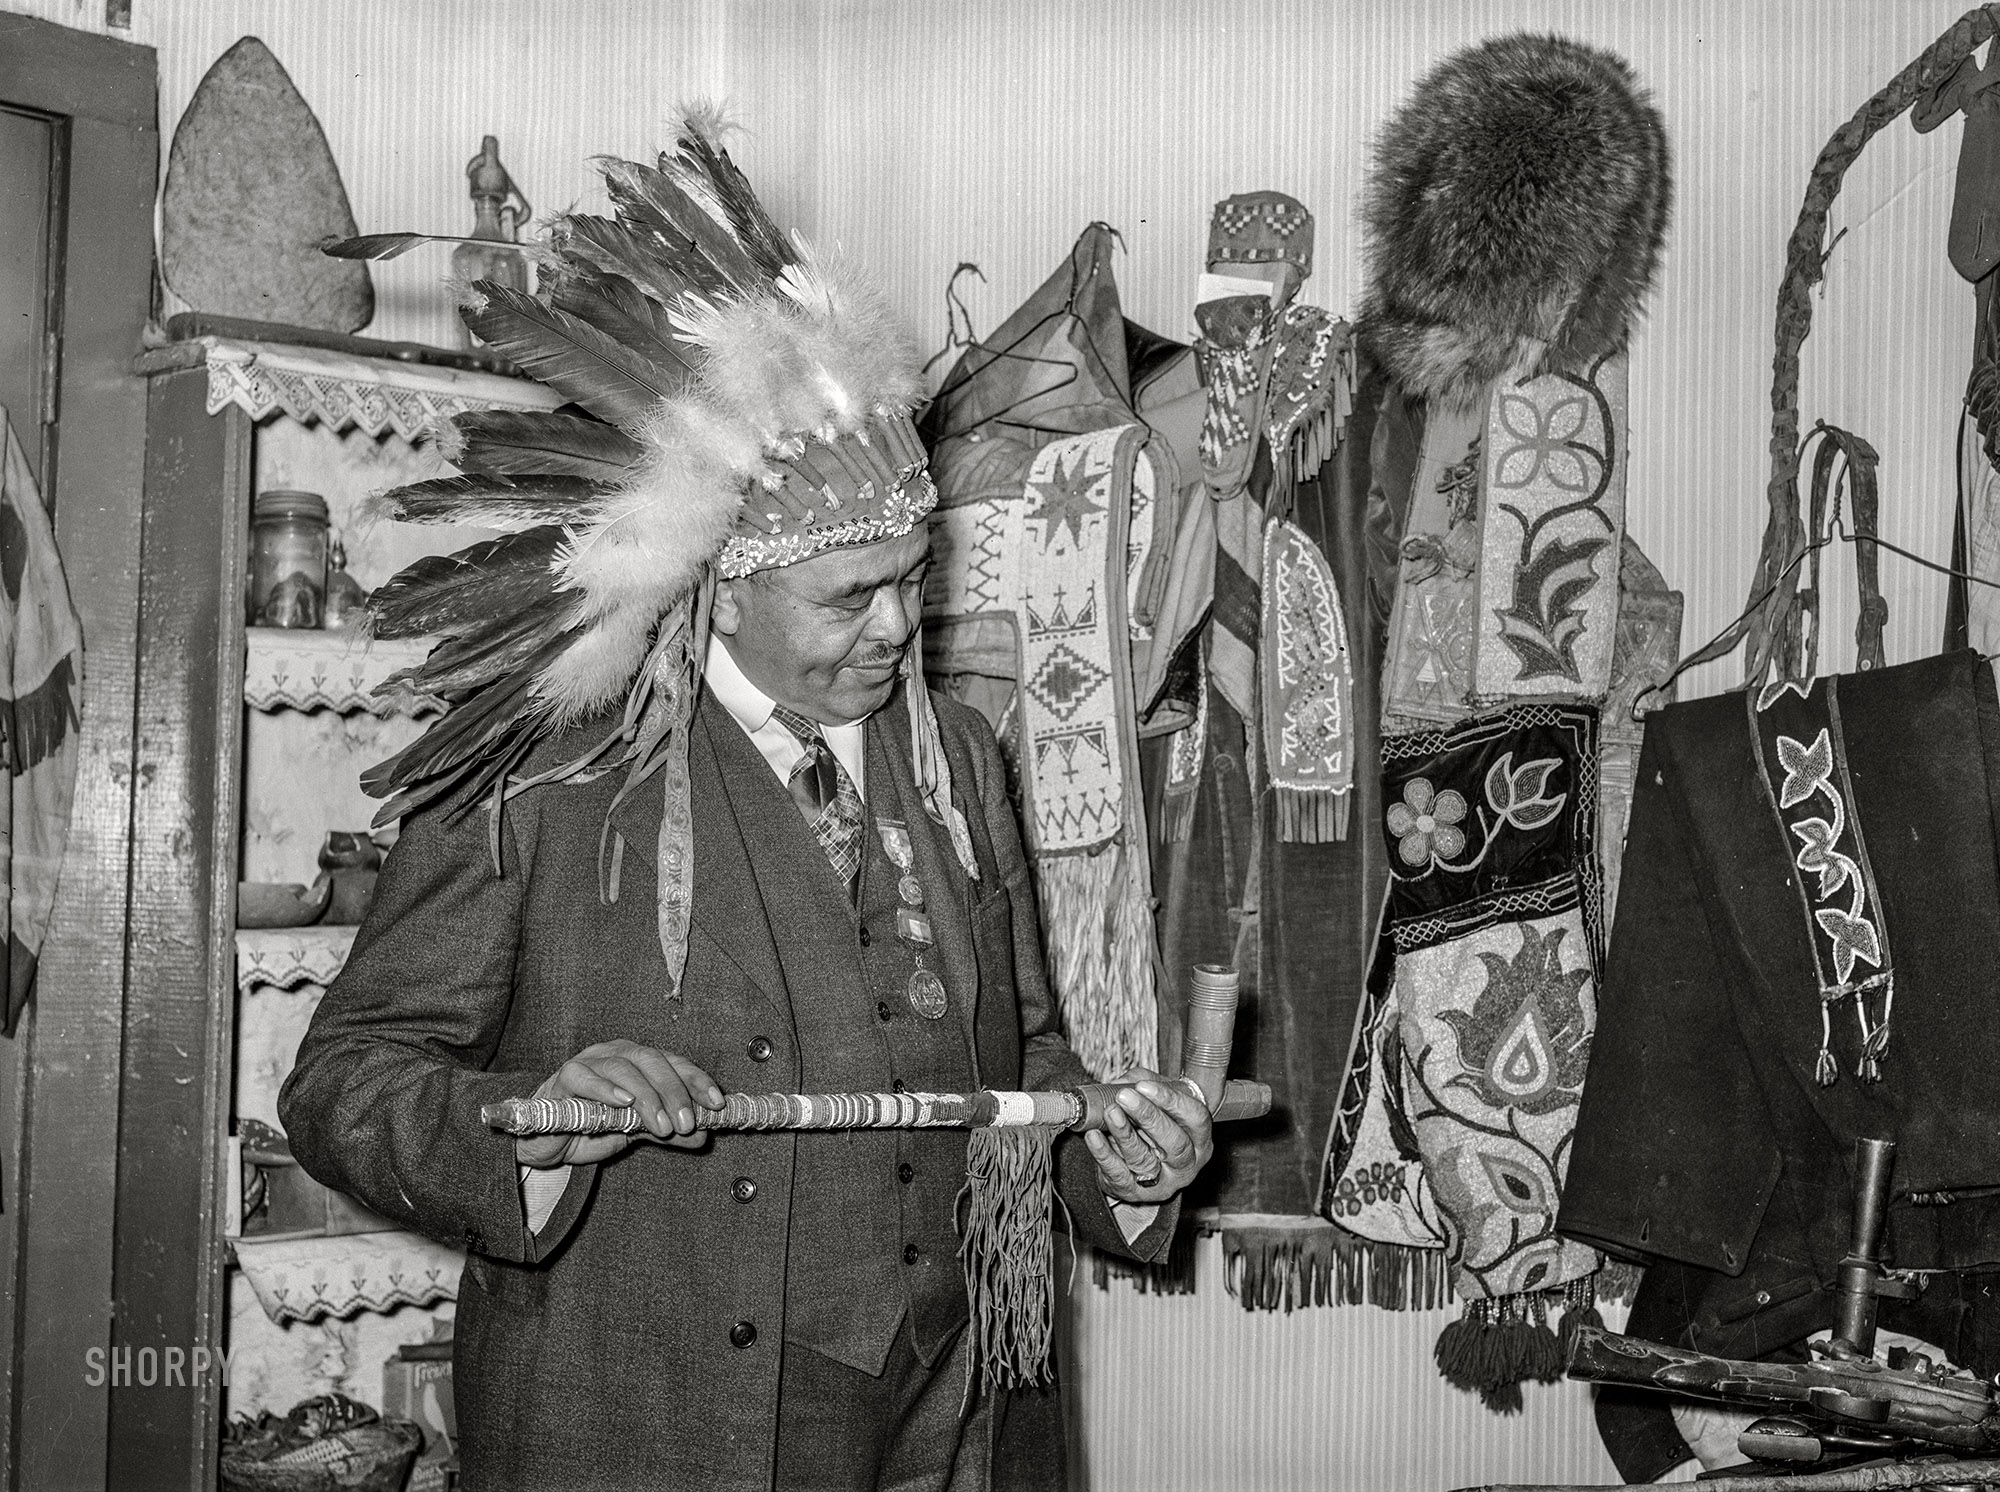 January 1939. "Dr. Springs with Indian relics. Colp, Illinois." Medium format acetate negative by Arthur Rothstein for the Farm Security Administration. View full size.